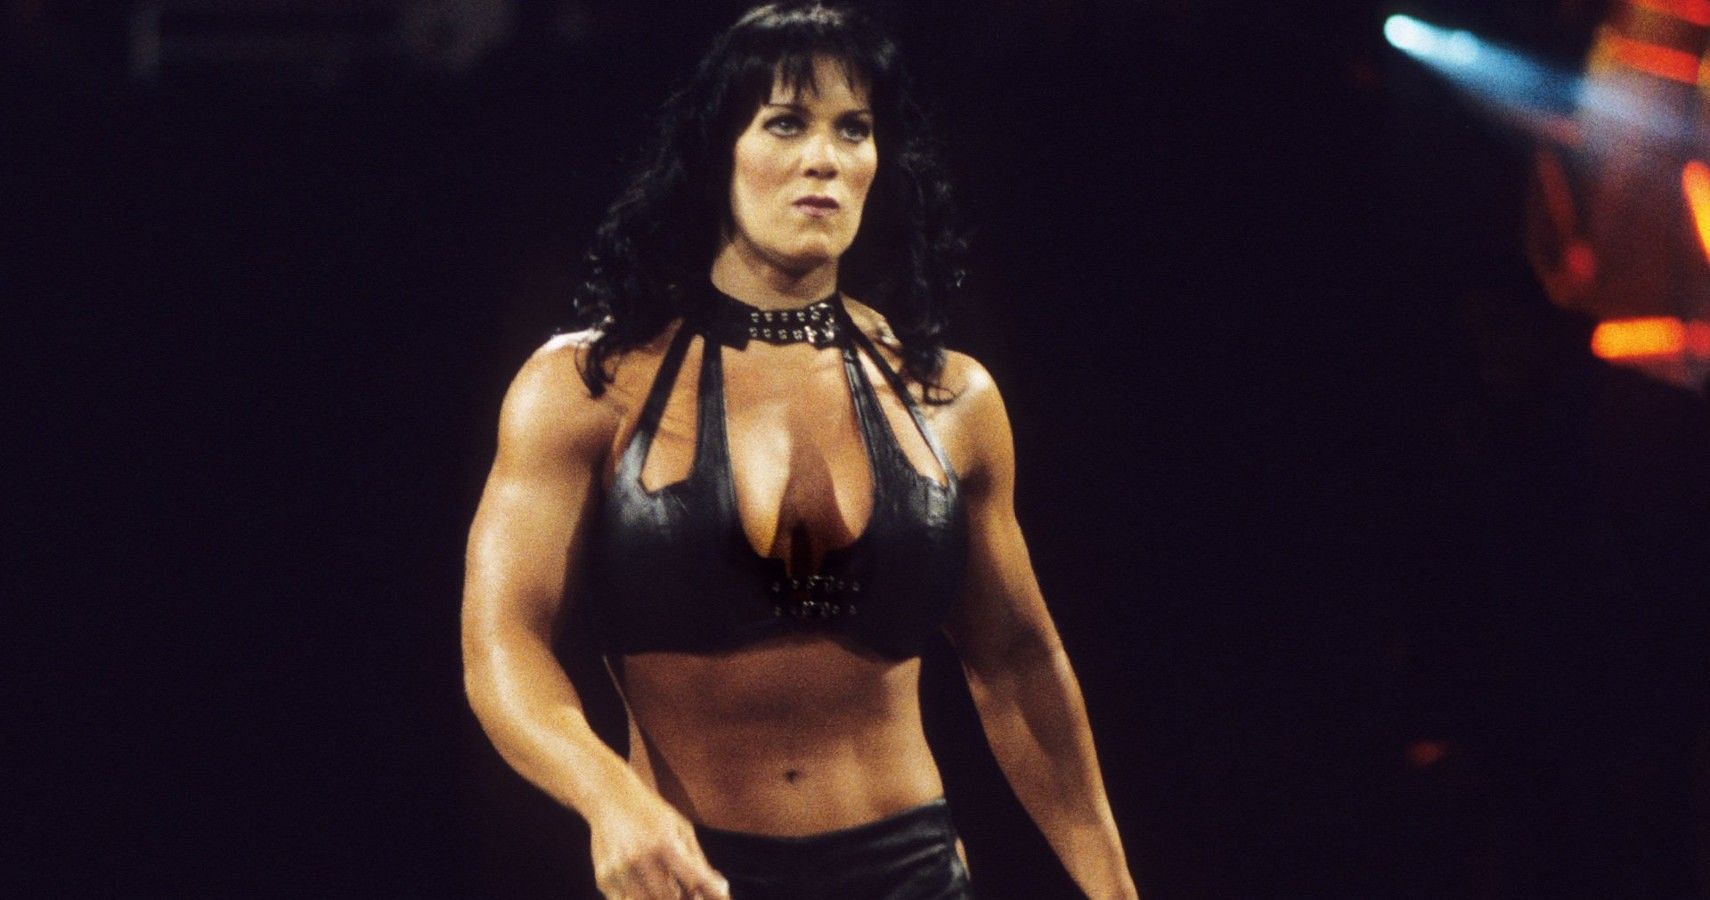 The late-WWE Hall of Famer was a trend setter in WWE.